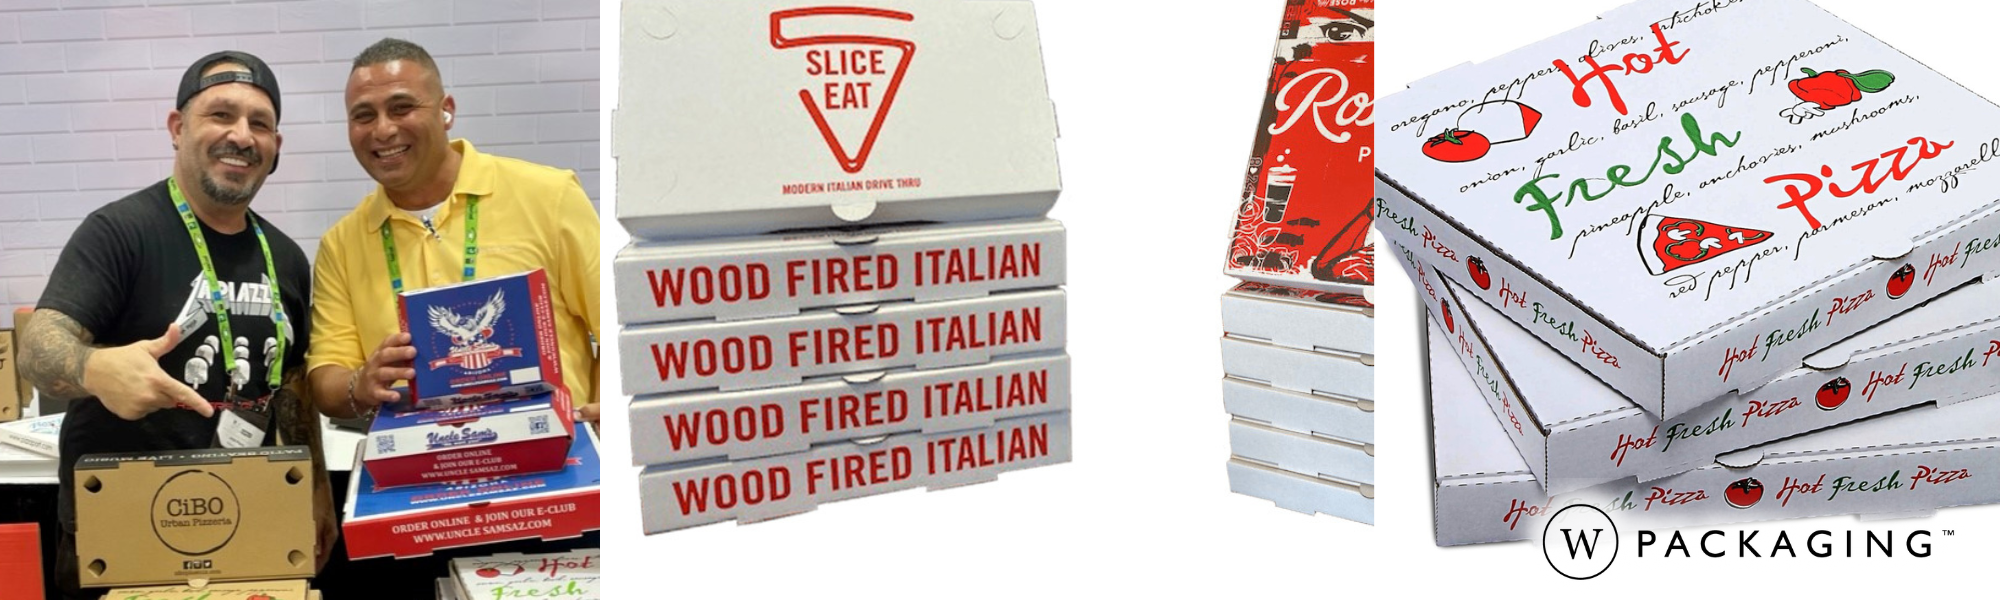 Supplies for Selling Pizza by the Slice - The Packaging Company